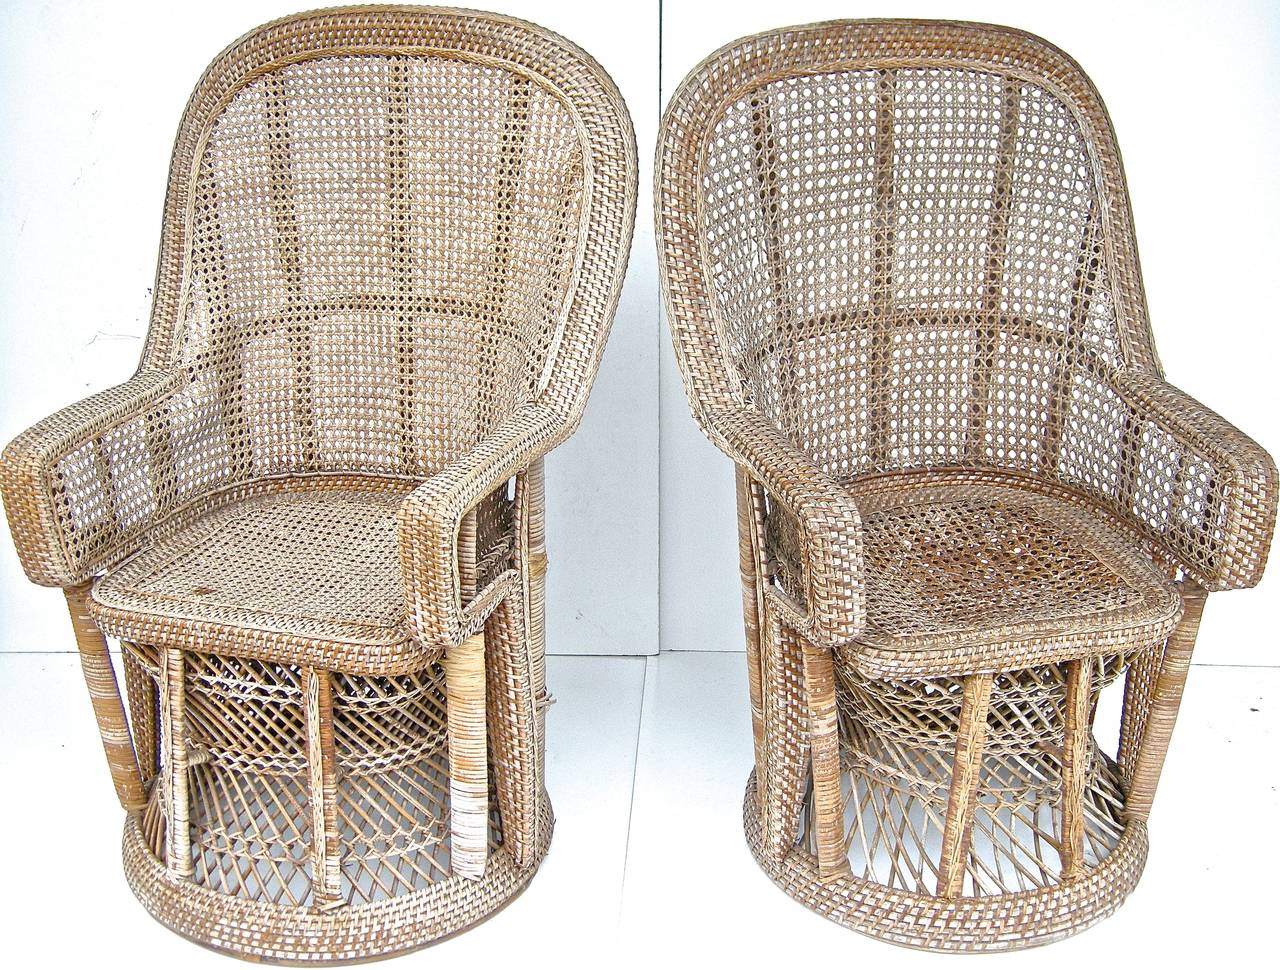 A handsome pair of vintage, woven and wrapped wicker armchairs in the Moroccan manner and taste, elegant diminutive shapes and forms. Beautiful aged surfaces and patina. Original manufacturers copper tag on verso.